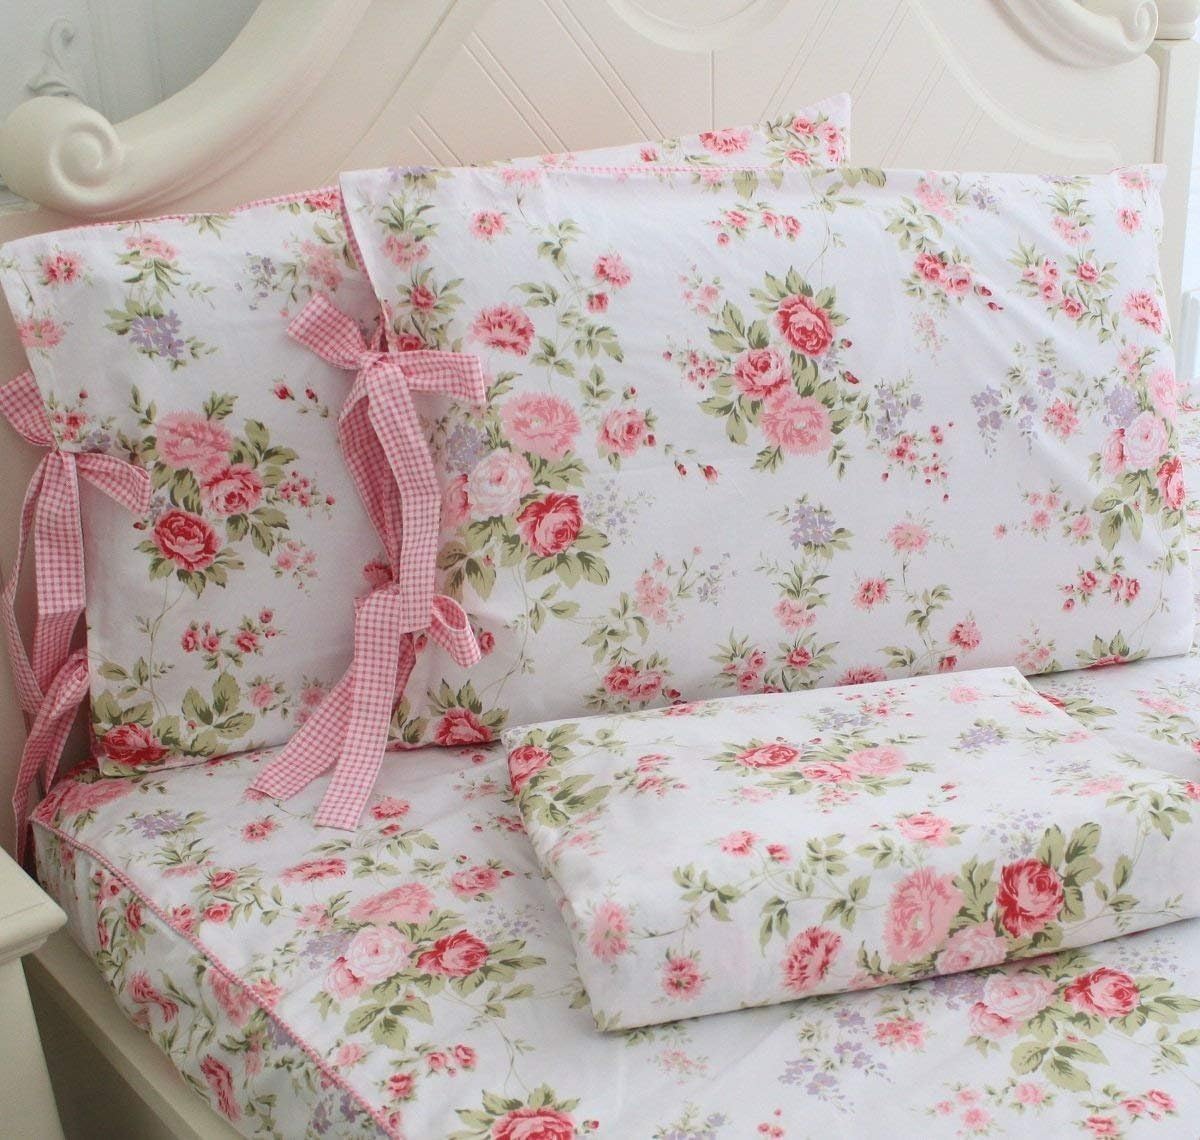 FADFAY Cotton Bed Sheets Set Shabby Rose Floral Print Sheet Bedding 4-Piece Twin Size